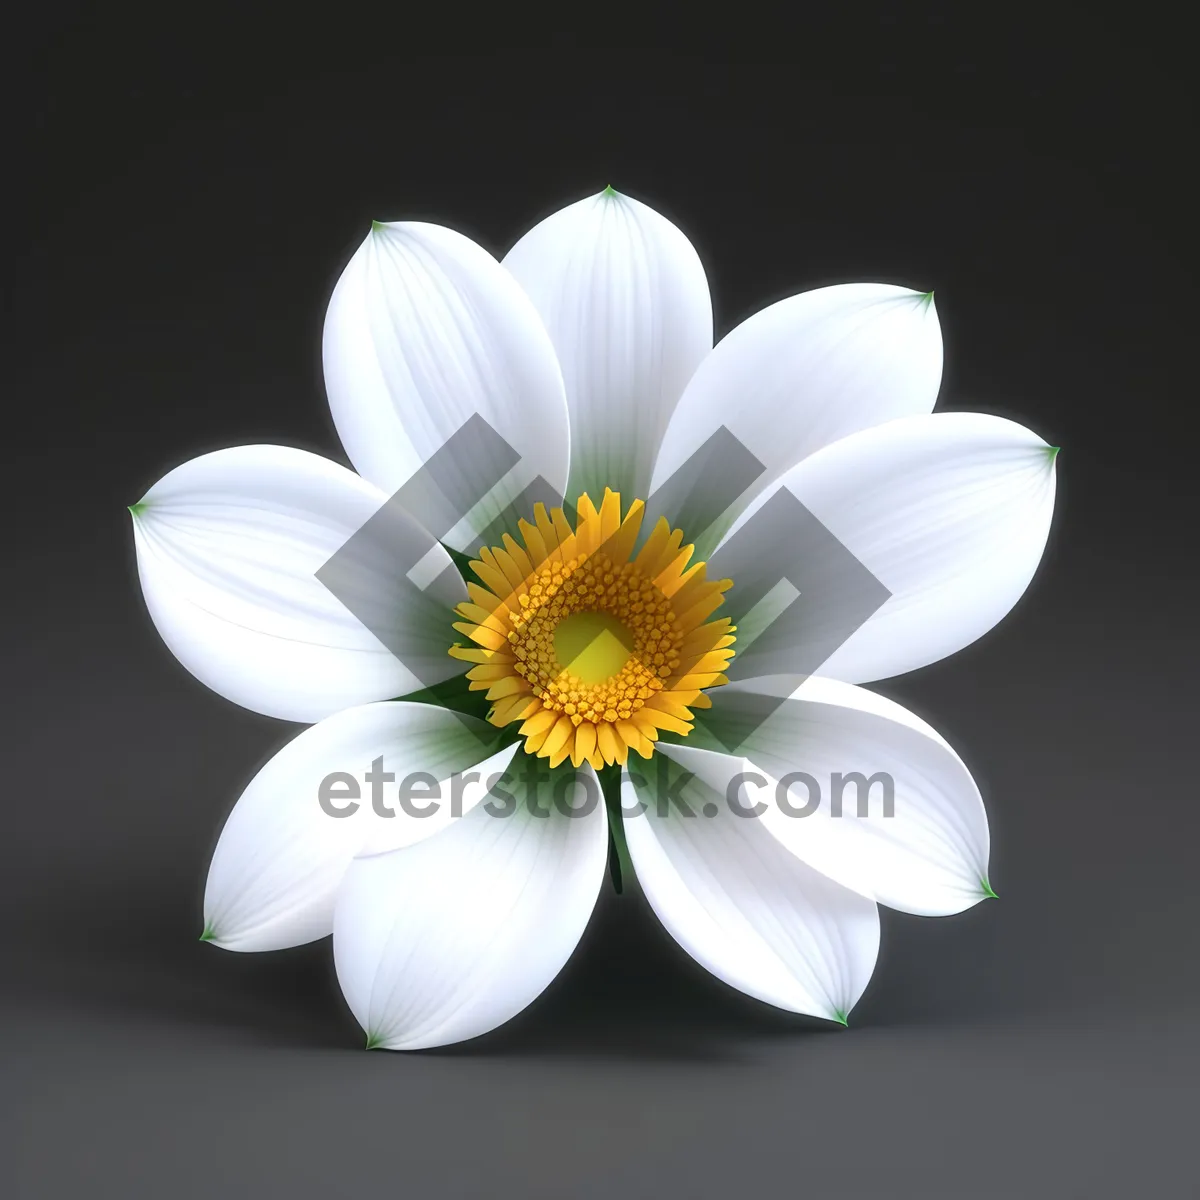 Picture of Daisy Petal Bloom: White Floral Delight in Meadow